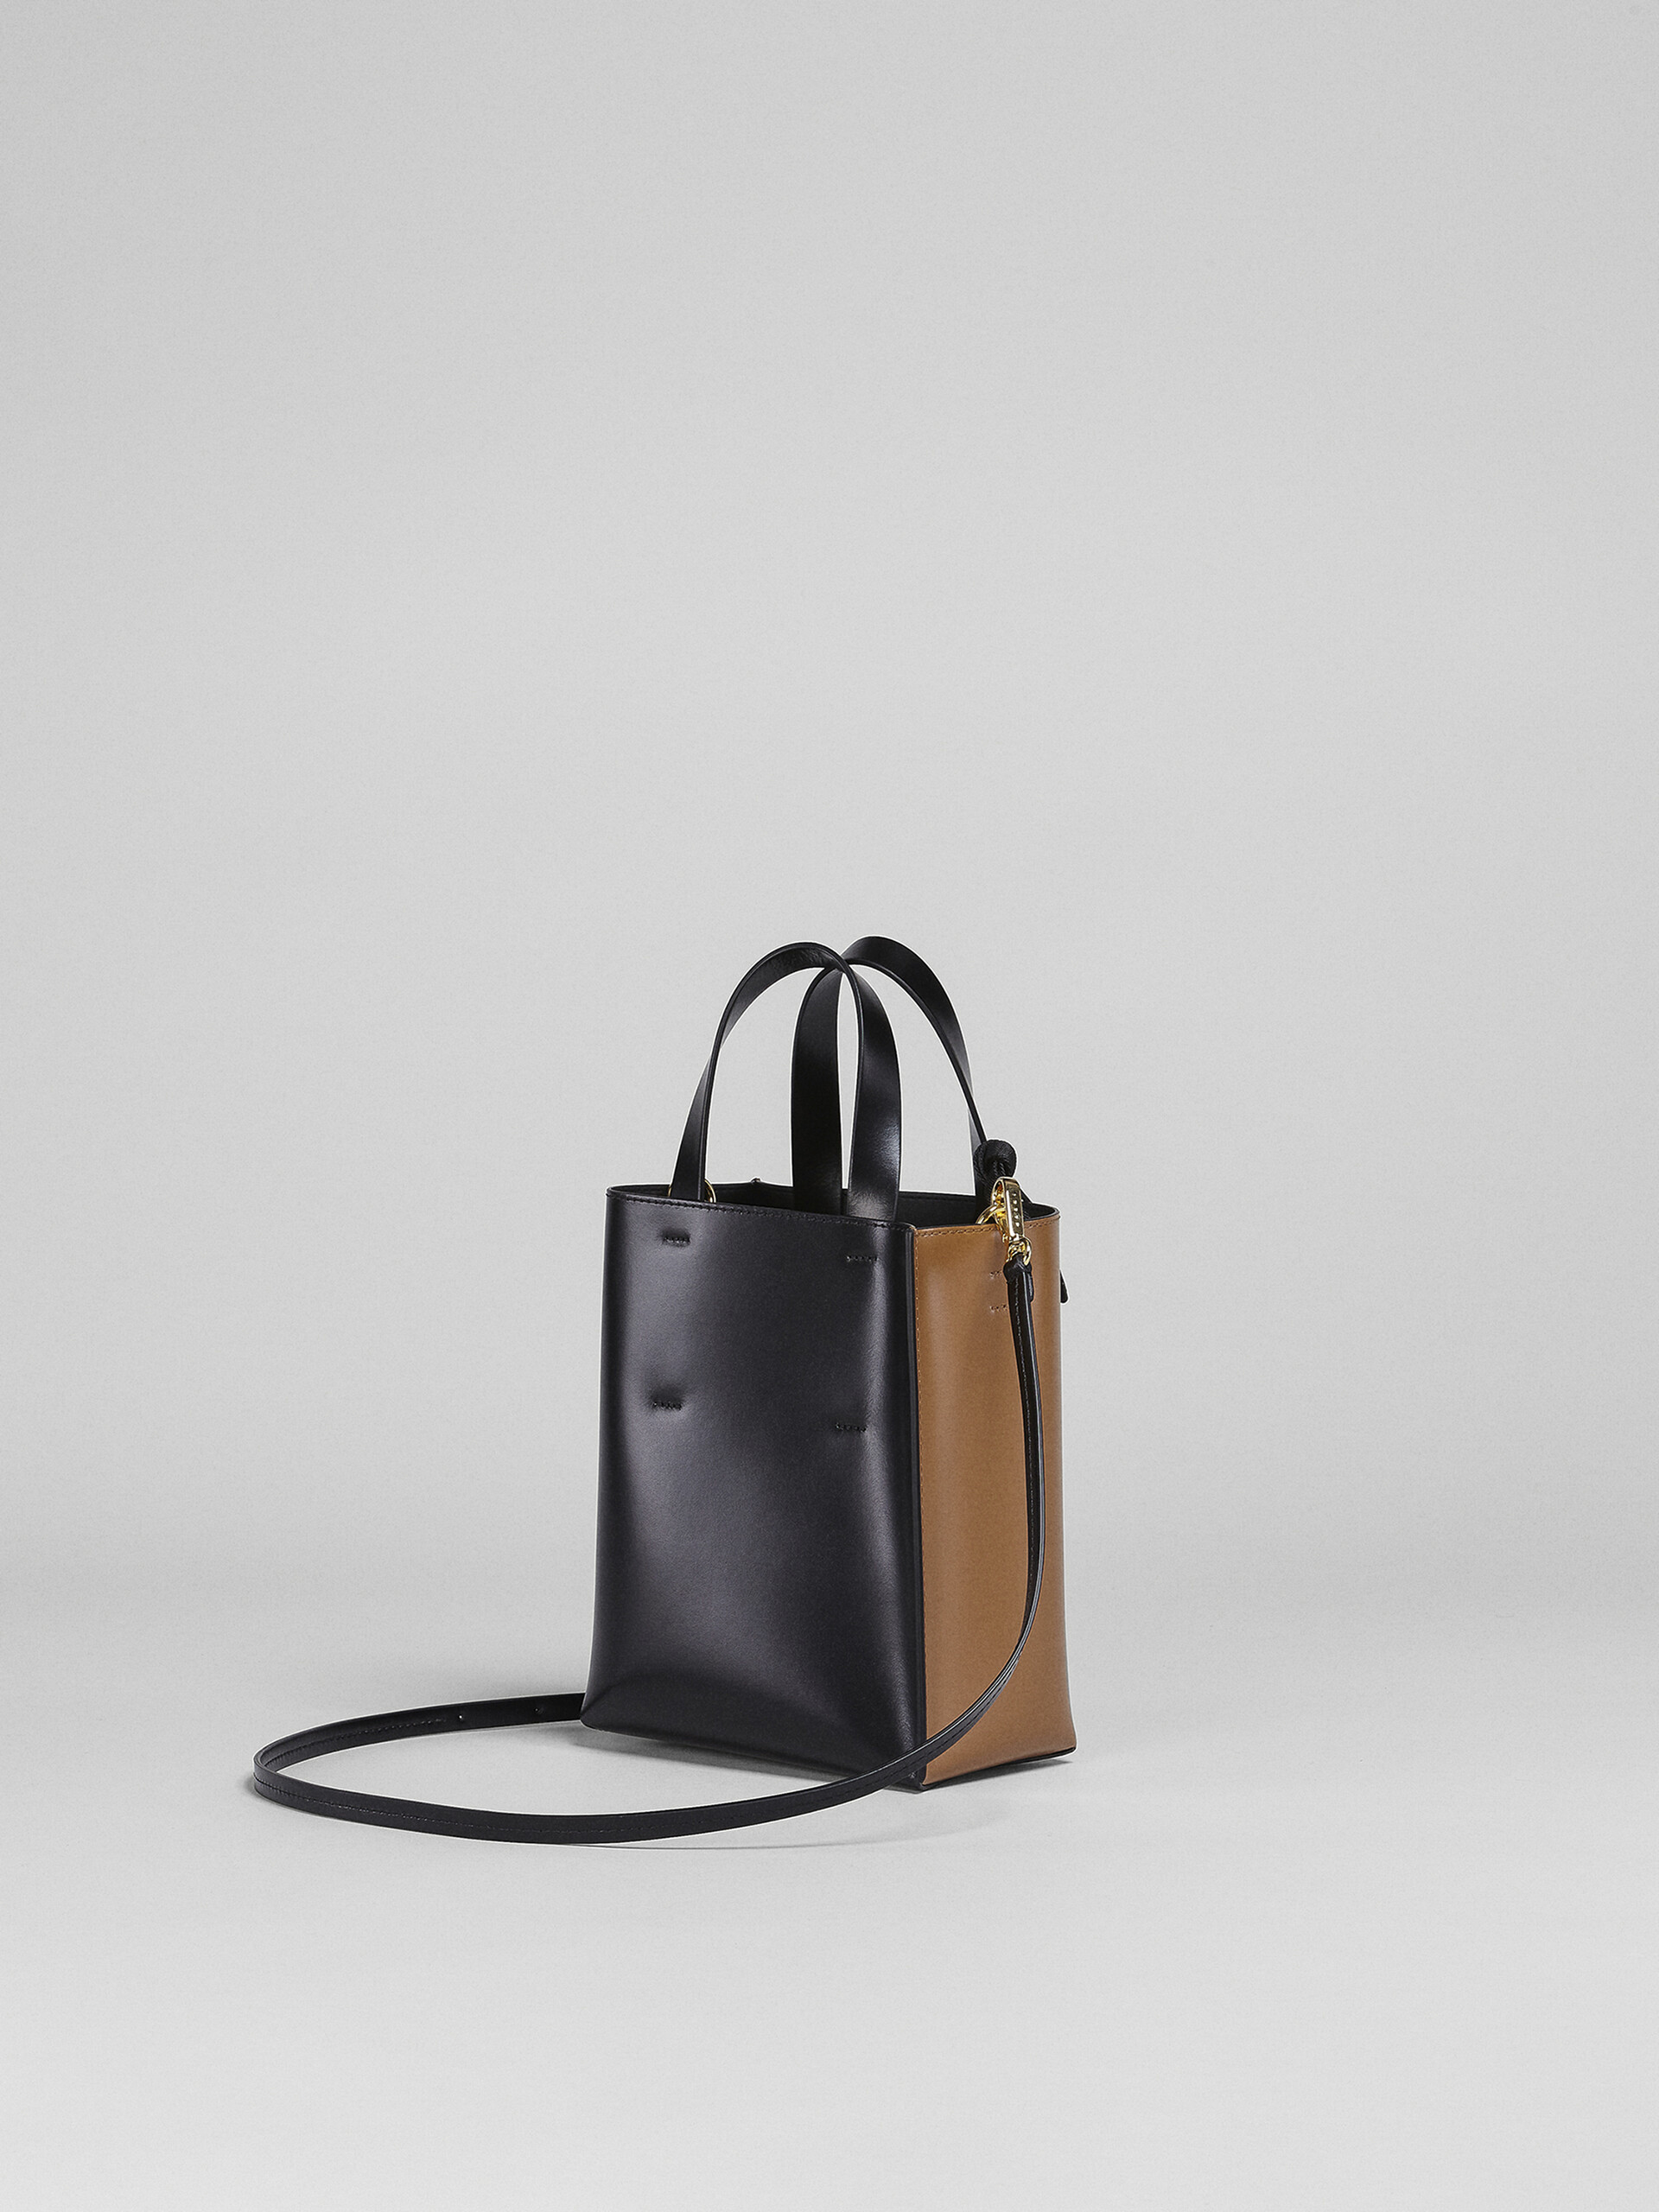 Museo Mini Bag in black and brown leather - Shopping Bags - Image 3